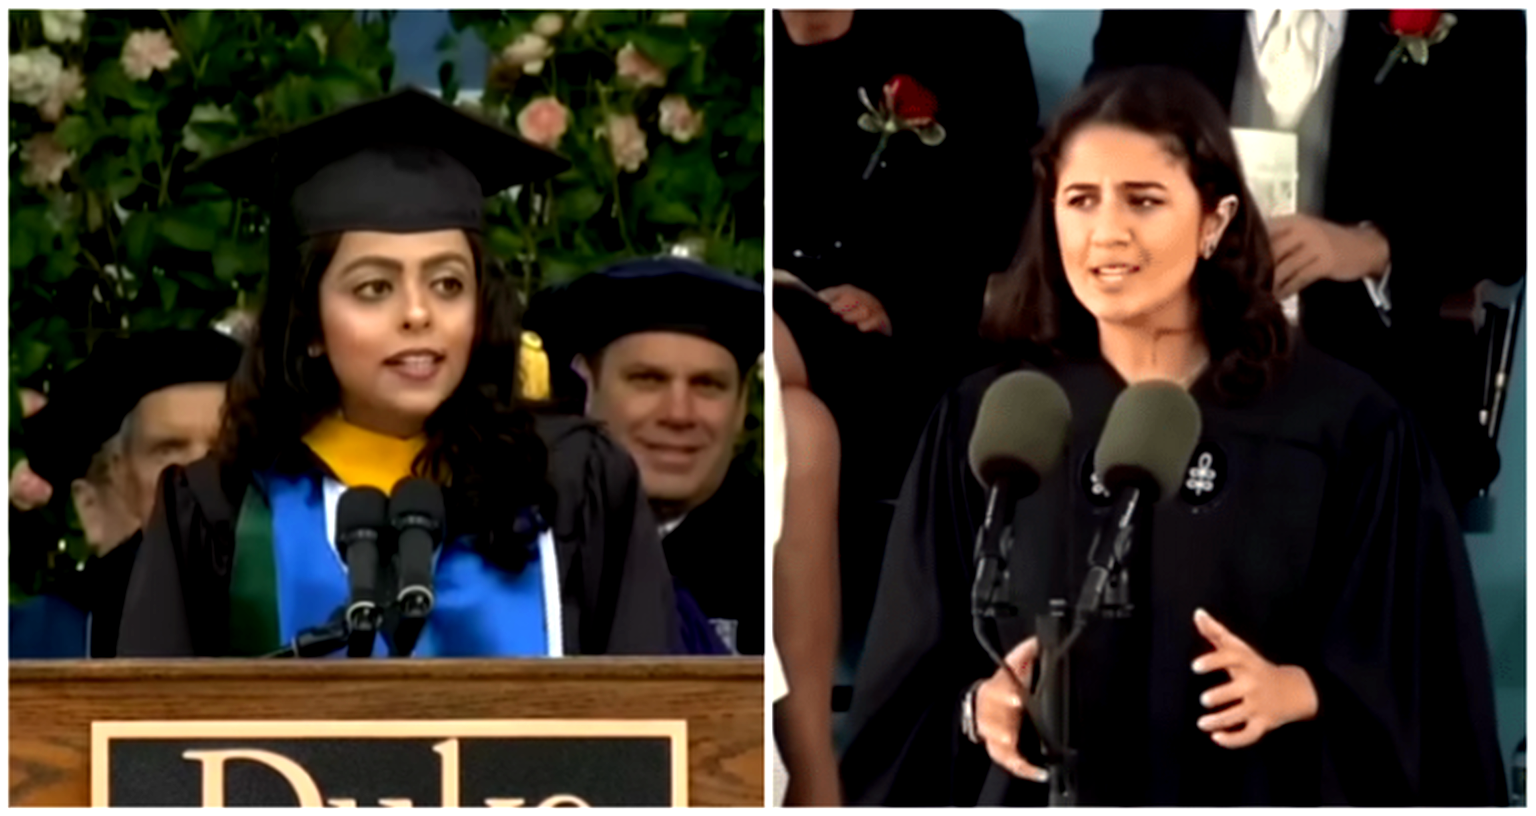 Duke senior’s commencement speech accused of being plagiarized from Harvard student’s 2014 address